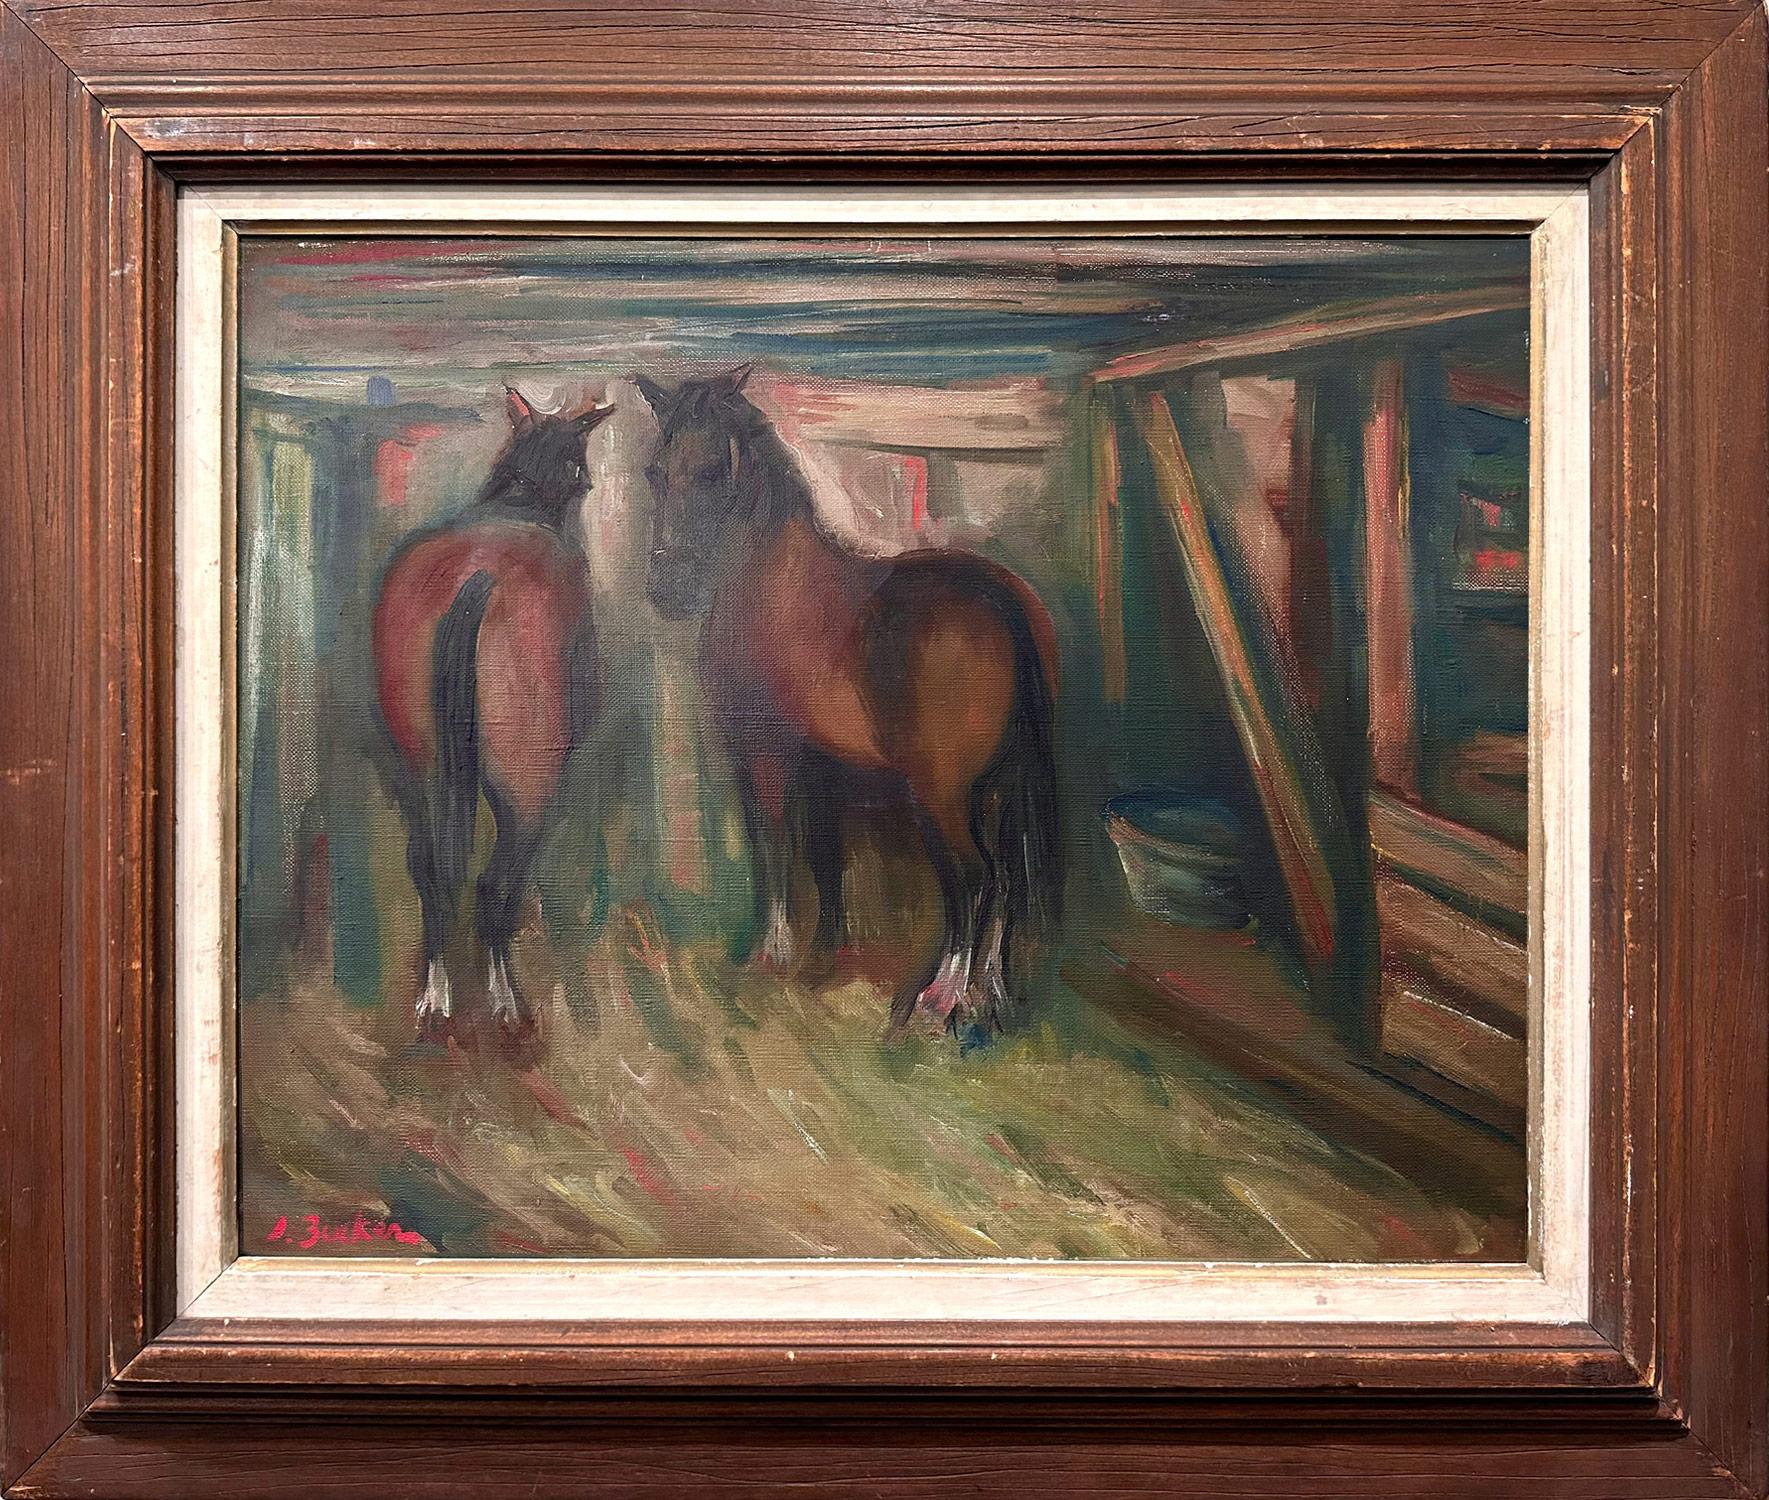 Jacques Zucker Animal Painting - "Horses in Stable" Post-Impressionist Pastoral Interior Oil Painting on Canvas